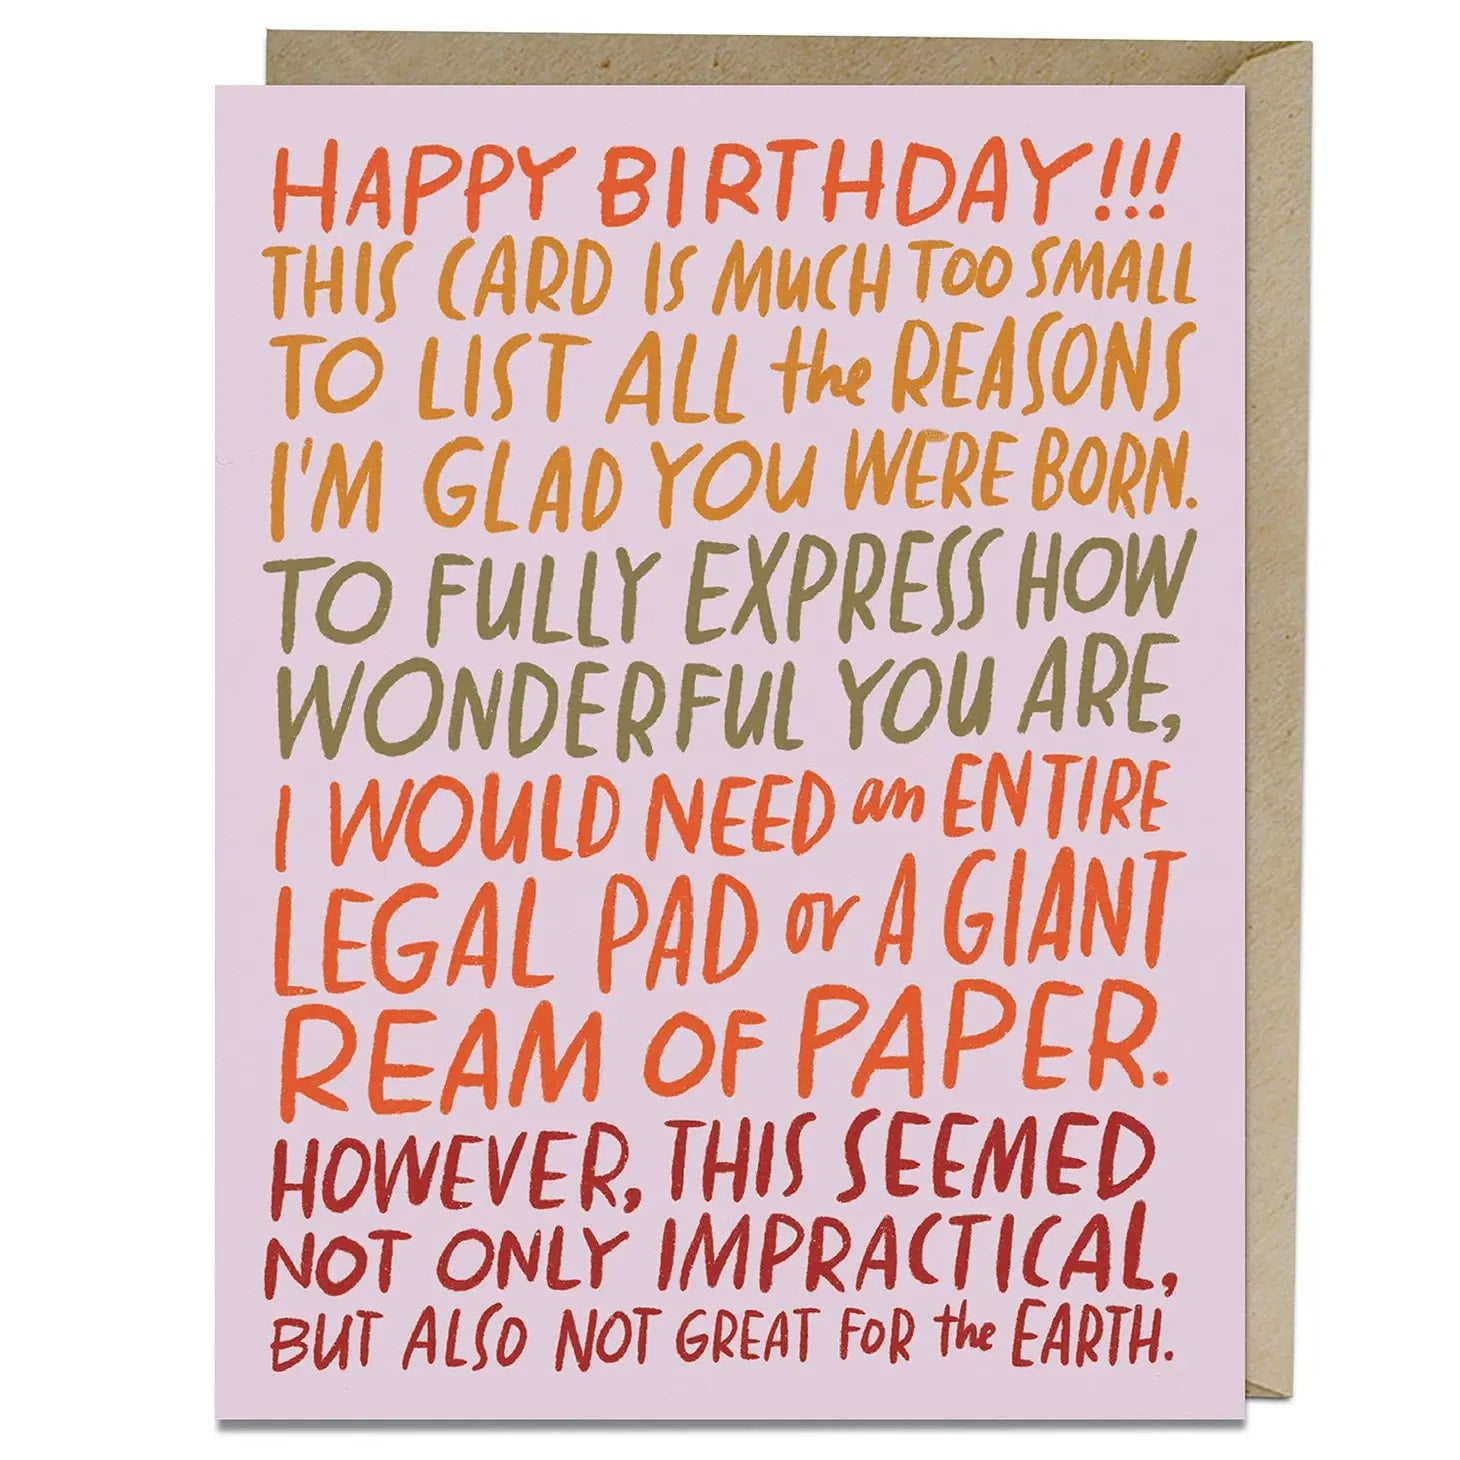 Ream of Paper Birthday Card by Emily McDowell